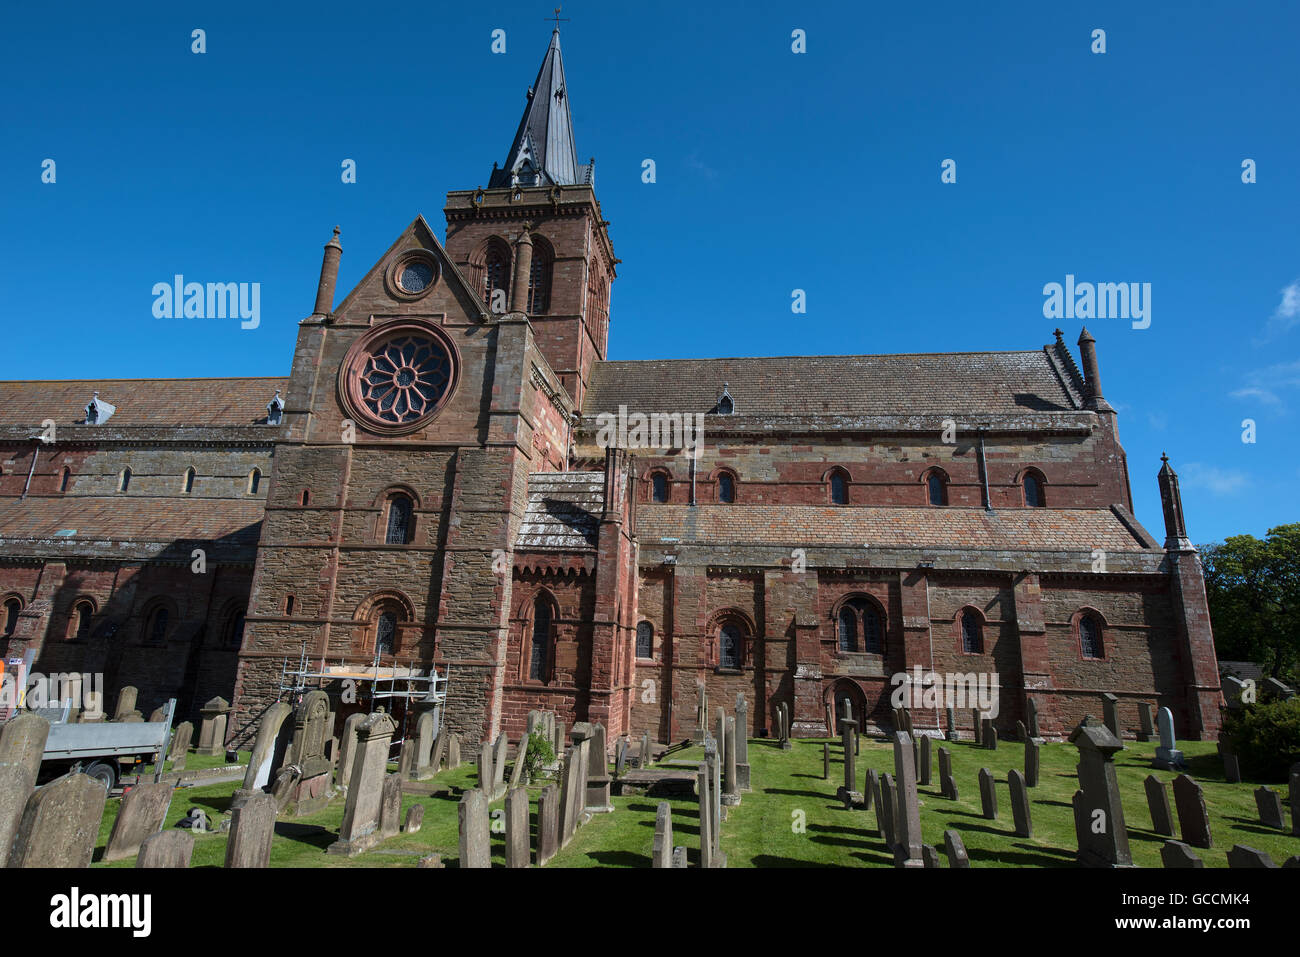 St Magnus Cathedral, in Kirkwall on the Orkney Isles.  SCO 10,585. Stock Photo